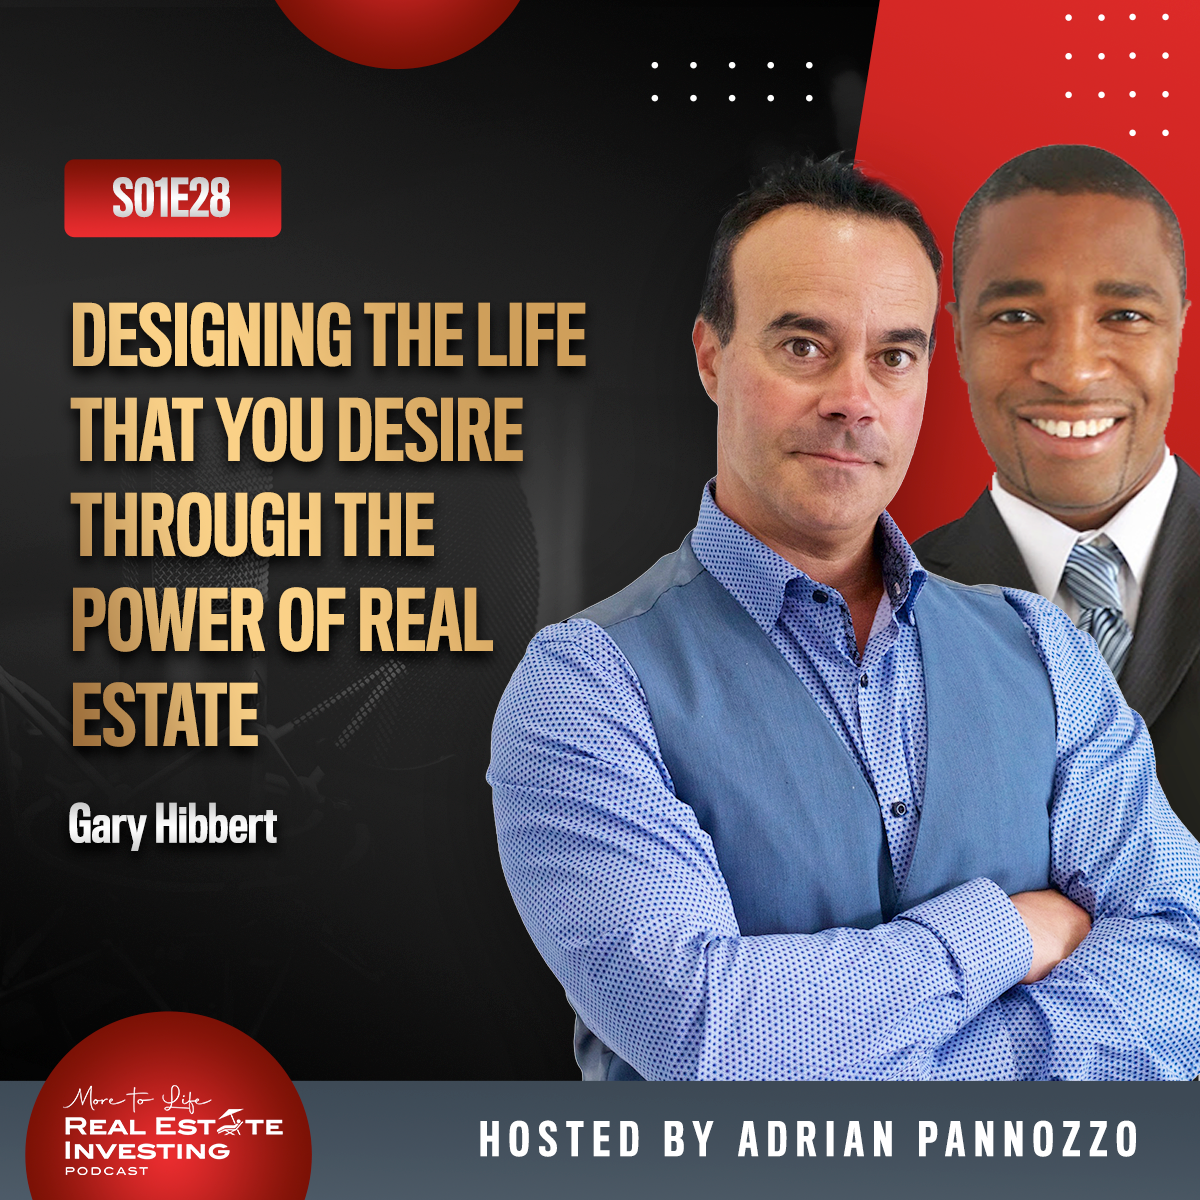 Designing the Life That You Desire Through the Power of Real Estate with Gary Hibbert